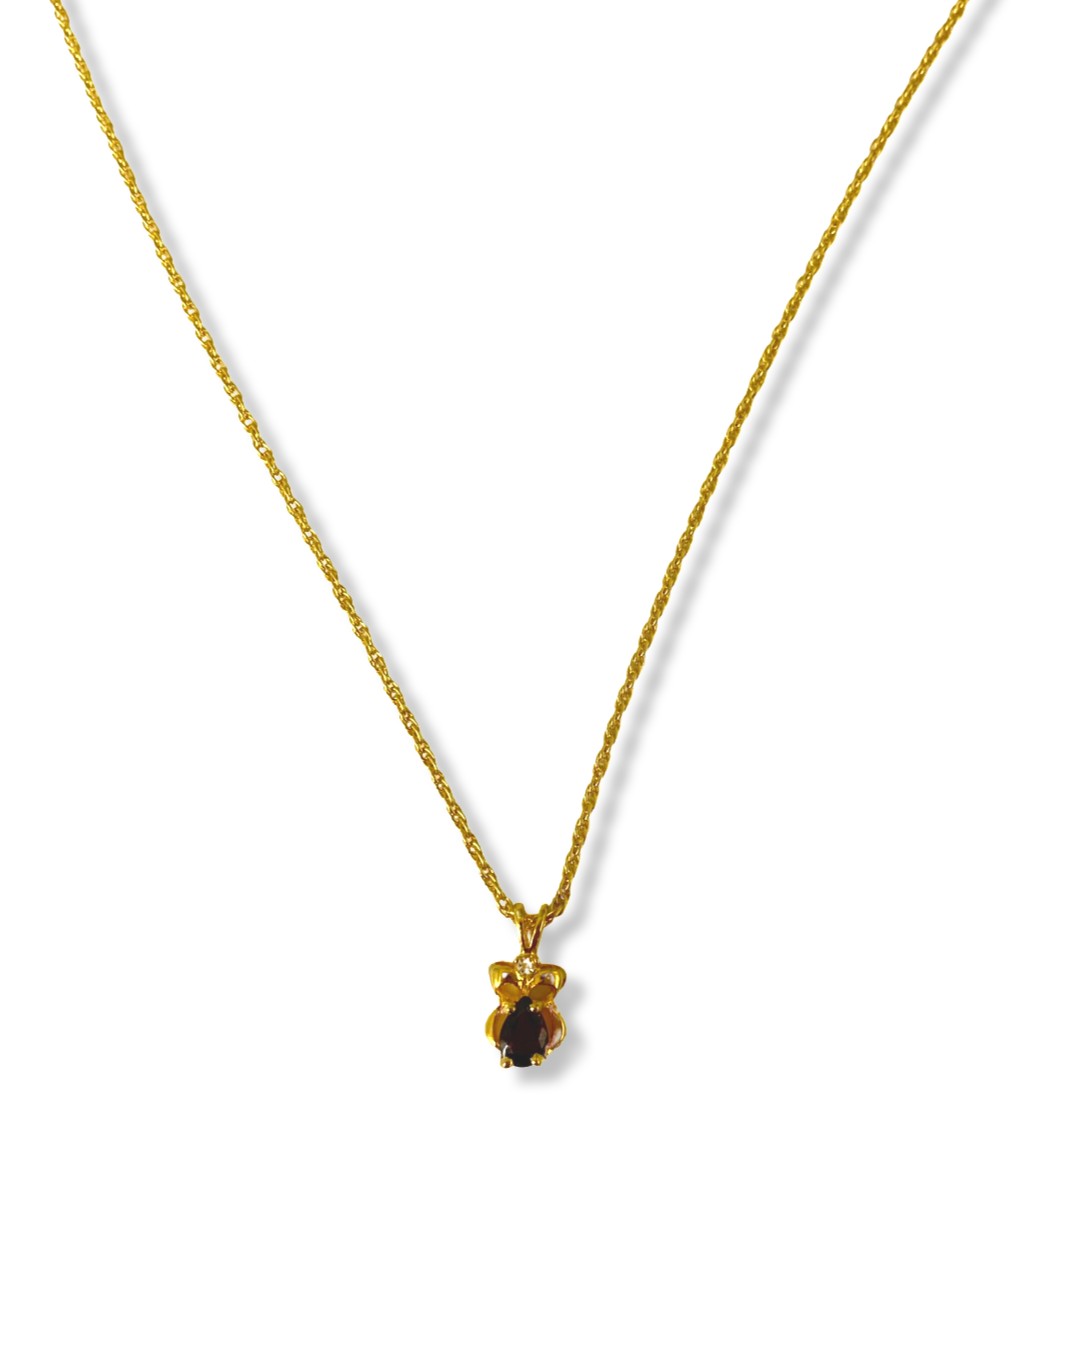 Three gold plated pendants featuring Garnet, Amethyst and Blue Topaz on two gold plated chains, with - Image 2 of 2